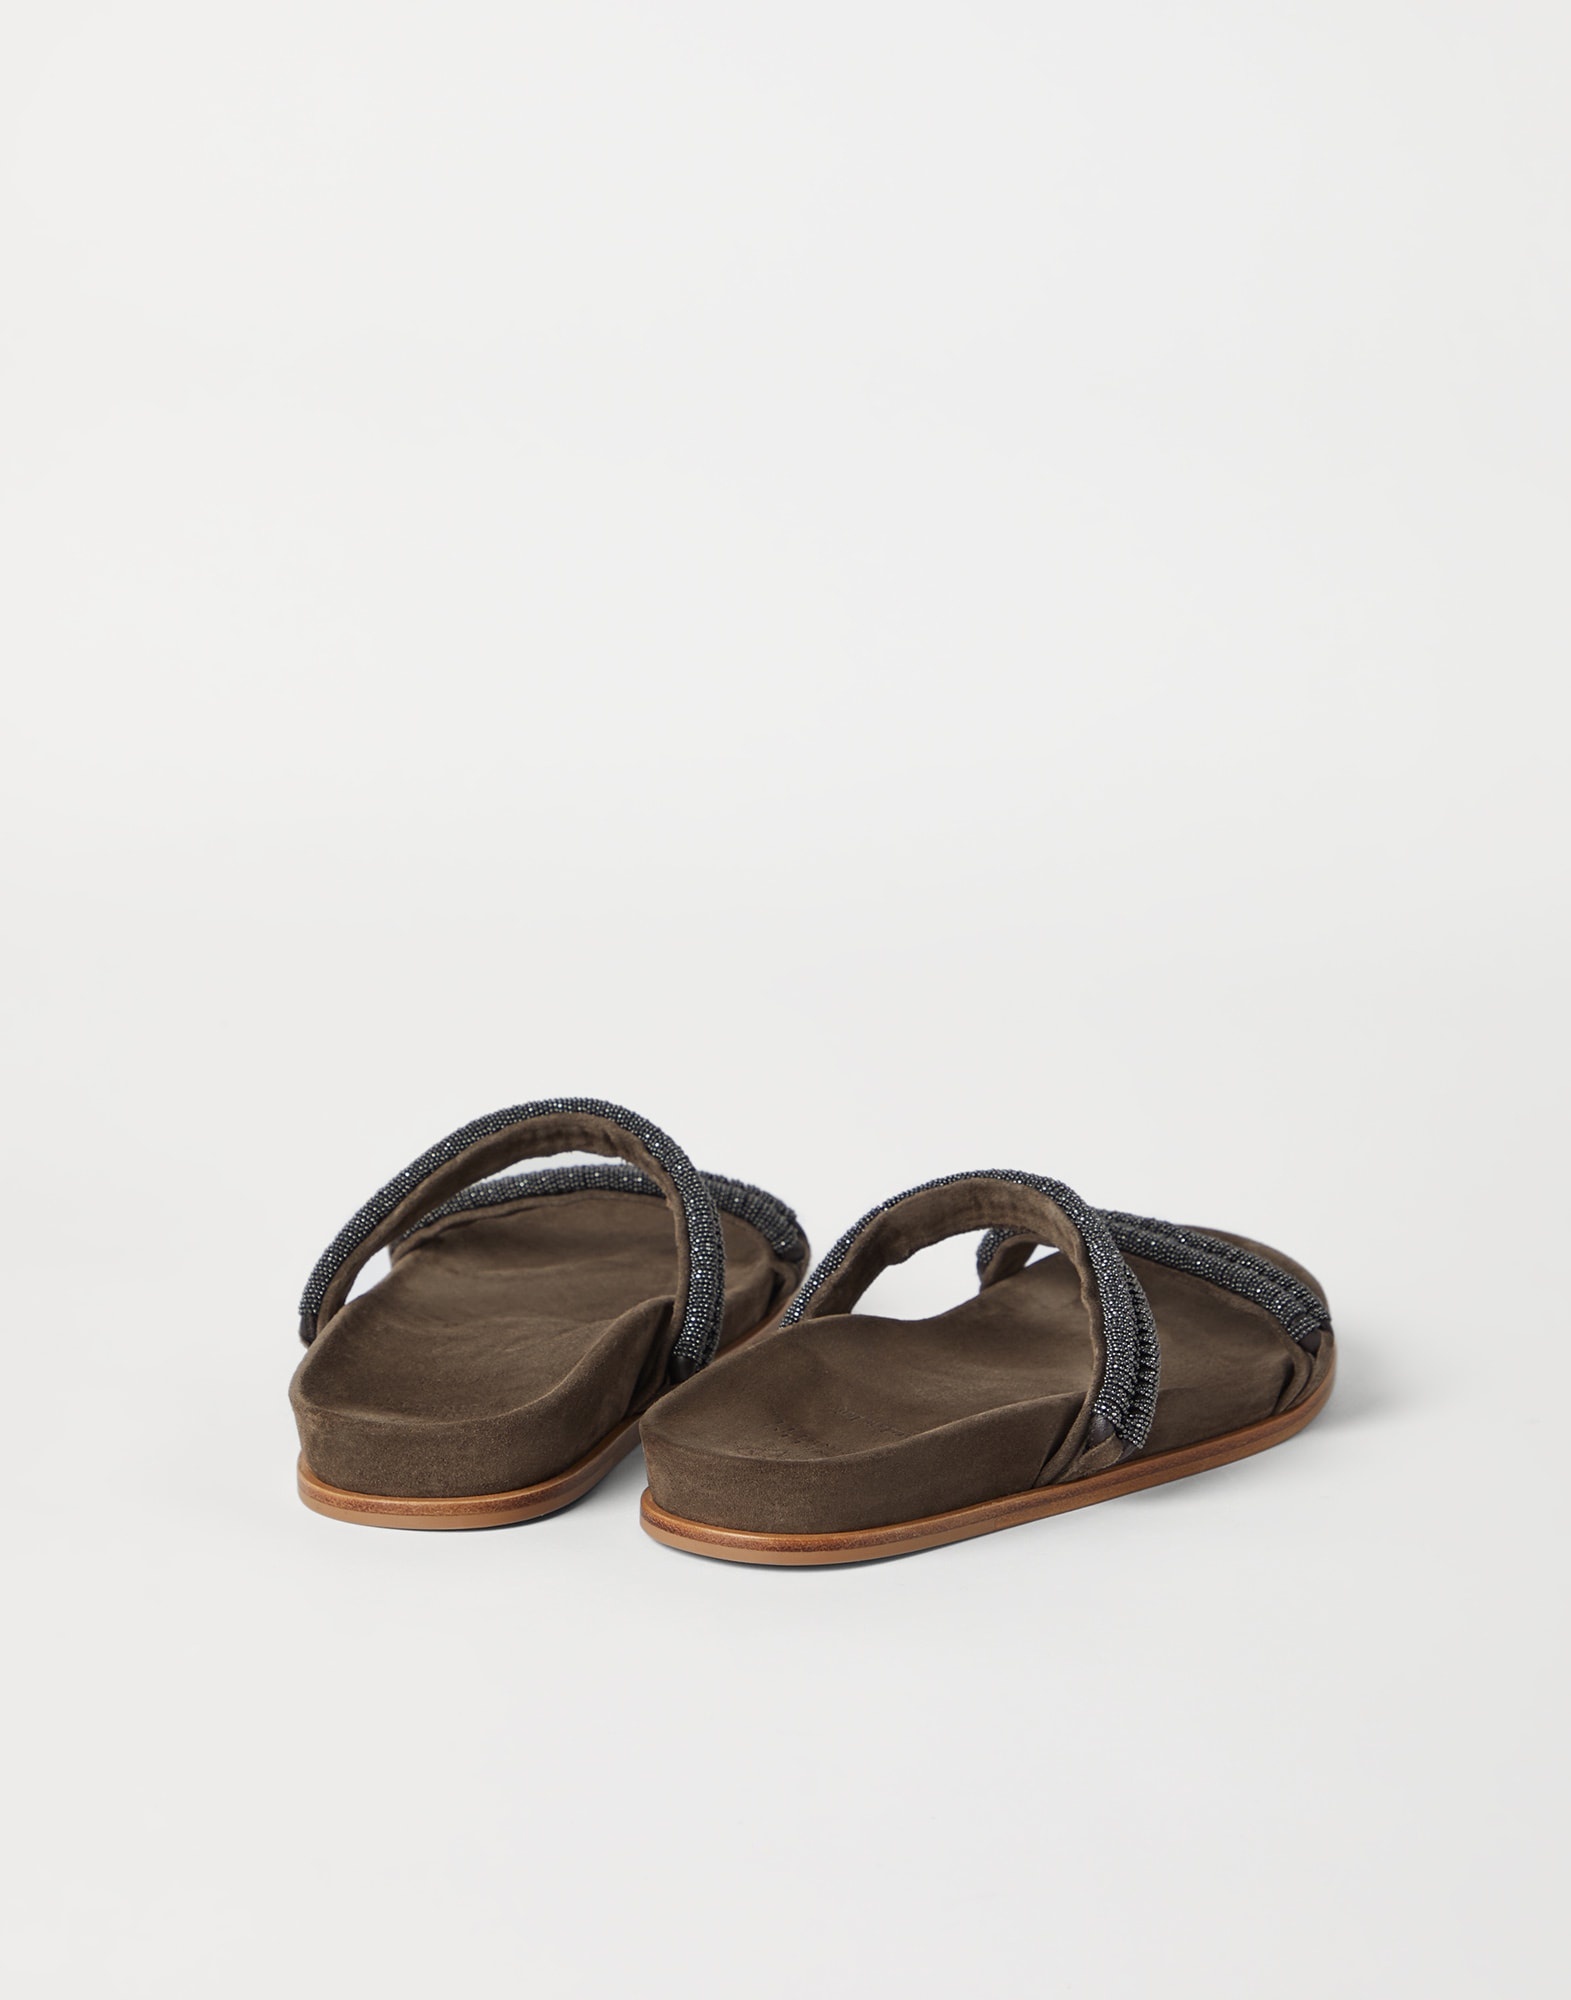 Suede slides with precious braided straps - 2